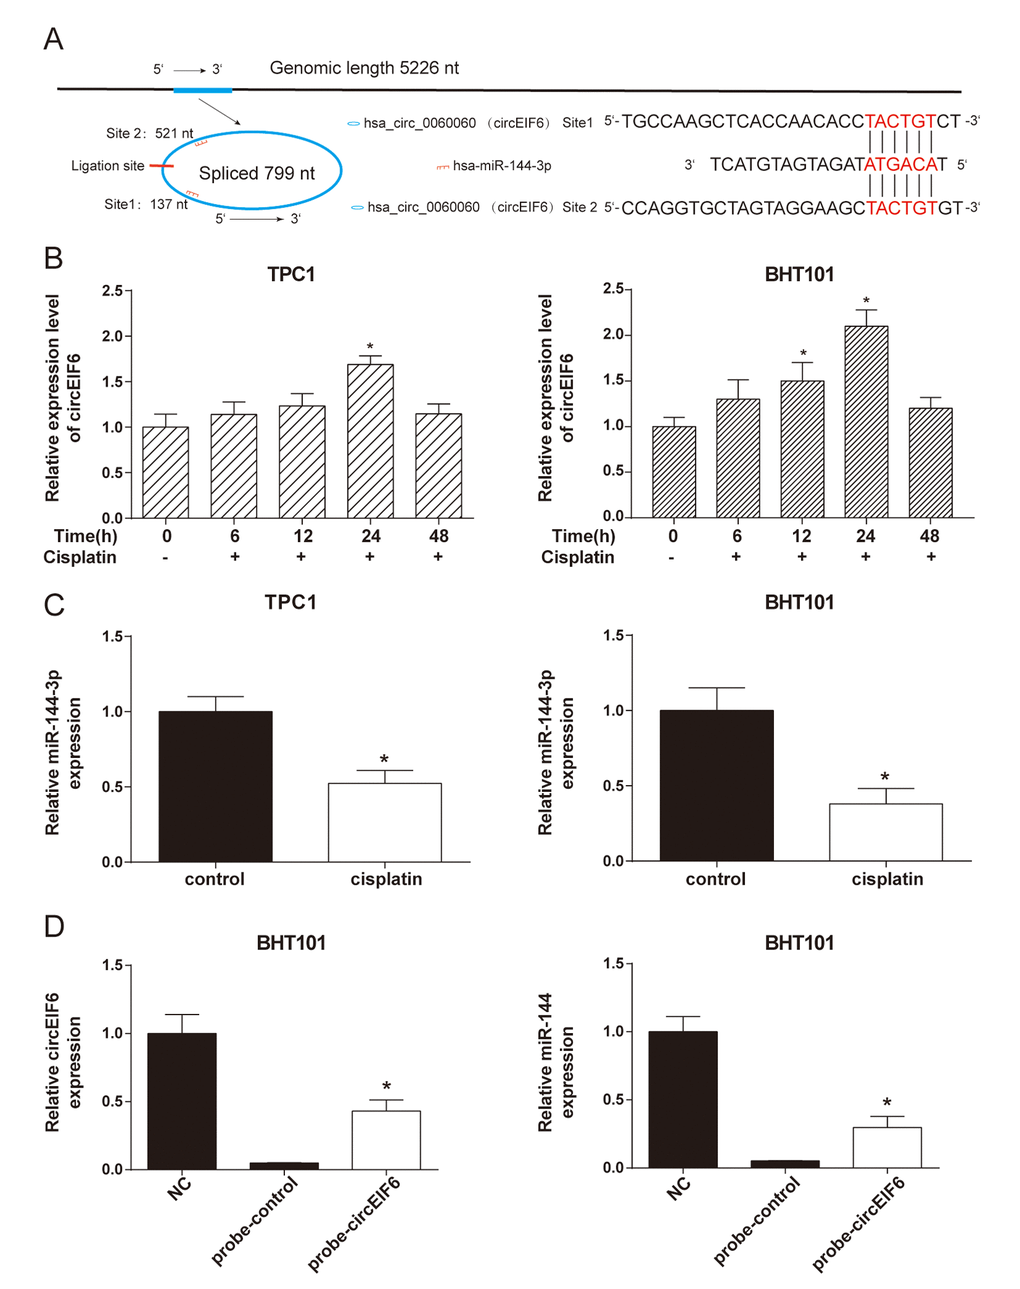 CircEIF6 and miR-144-3p had a target relationship and a reversed expressed in the TPC1 and BHT101 cells with cisplatin treatment. (A) There are potential 2 target binding sites between miR-144-3p and circEIF6. (B) Expressions of circEIF6 were detected in the TPC1 and BHT101 cells with different time cisplatin treatment. *P *P *P 